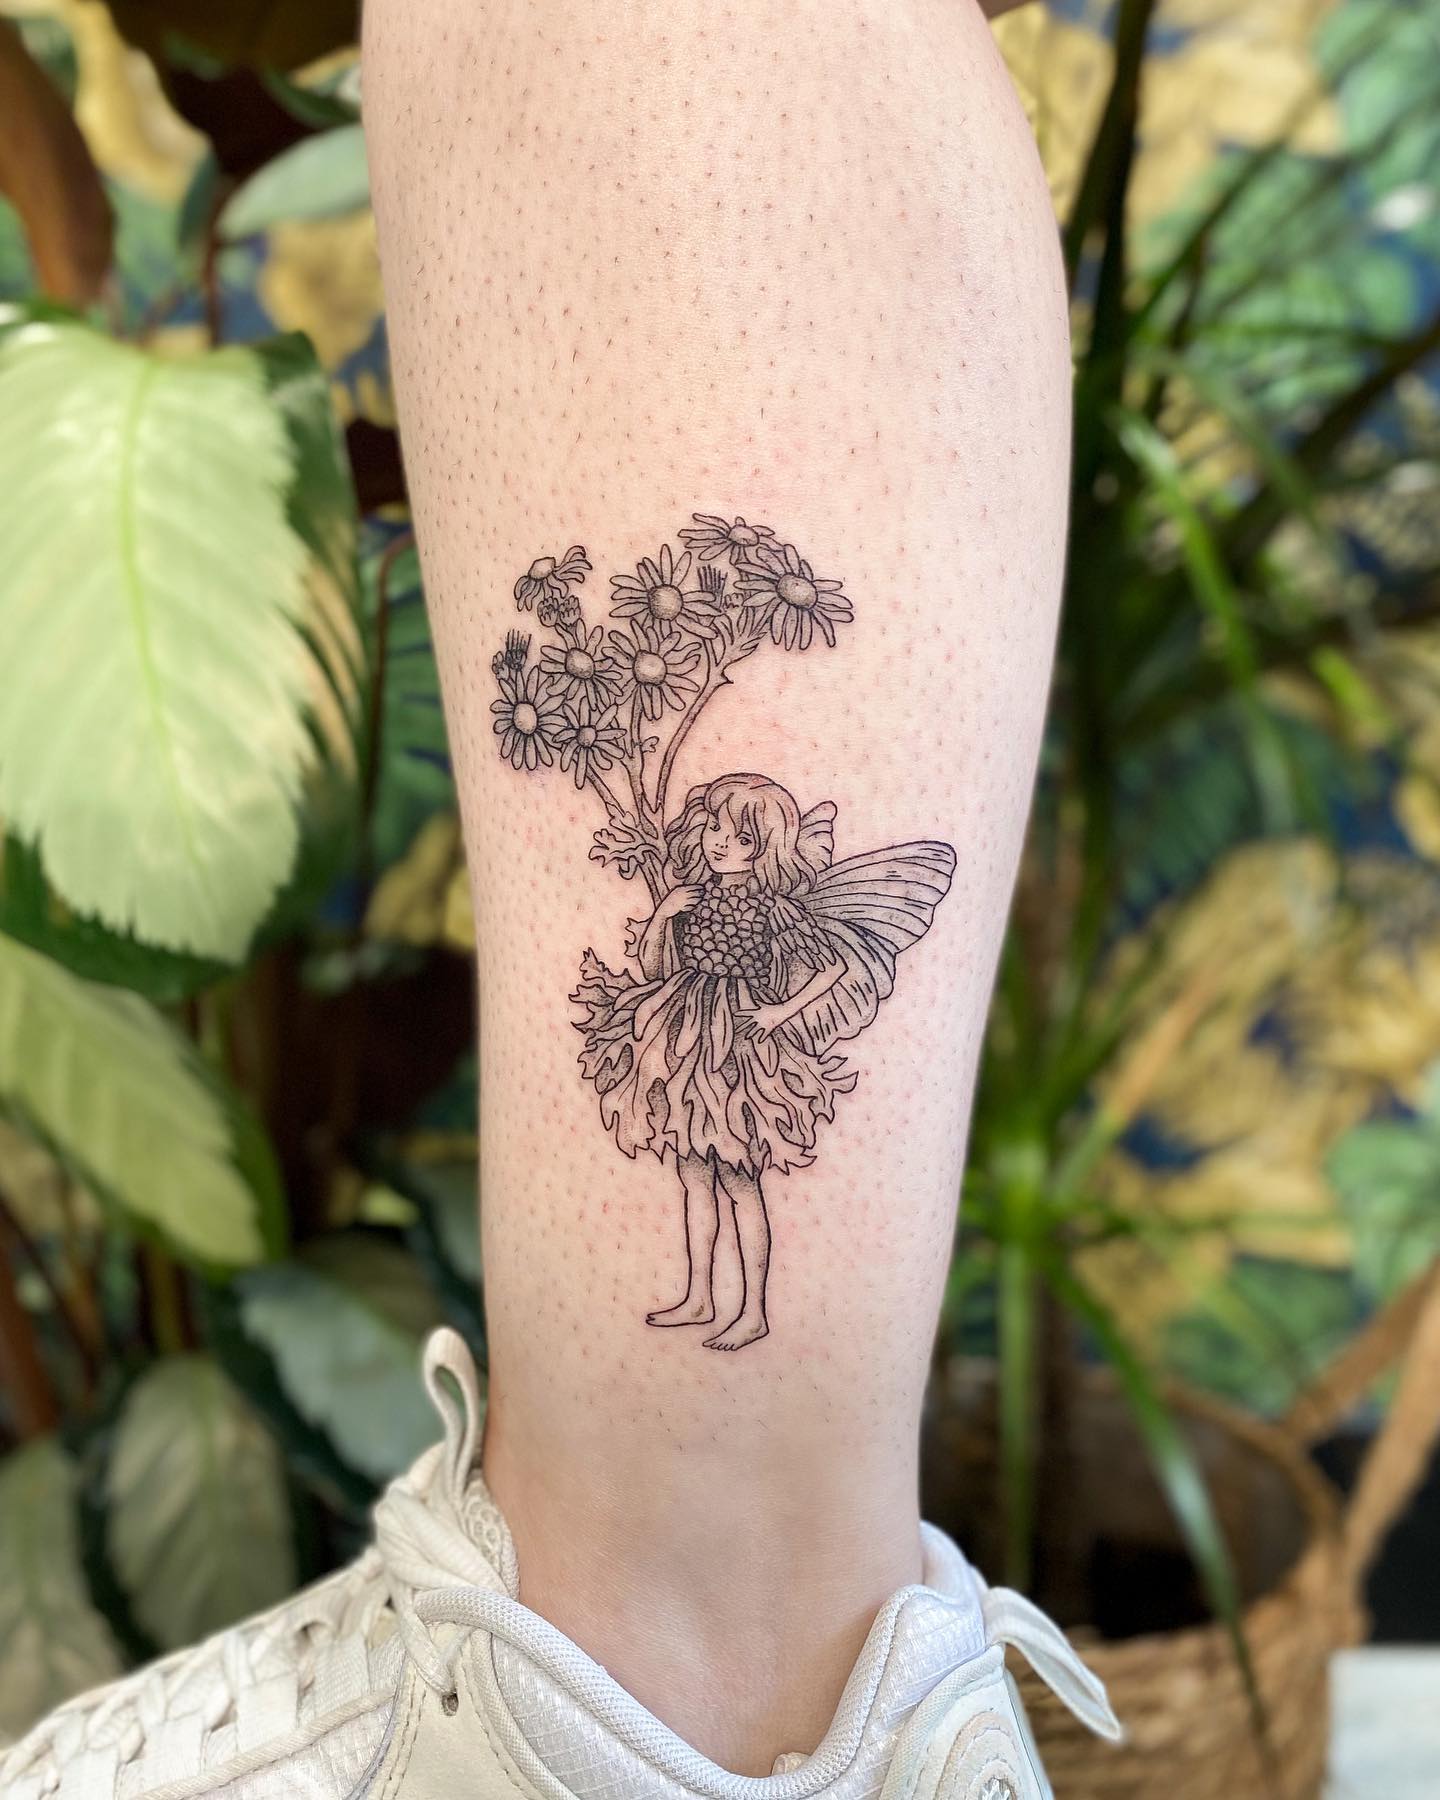 Everyone loves fairies. If you are looking for a cute dotwork tattoo design and believe in magic, a fairy can be a great choice for it.